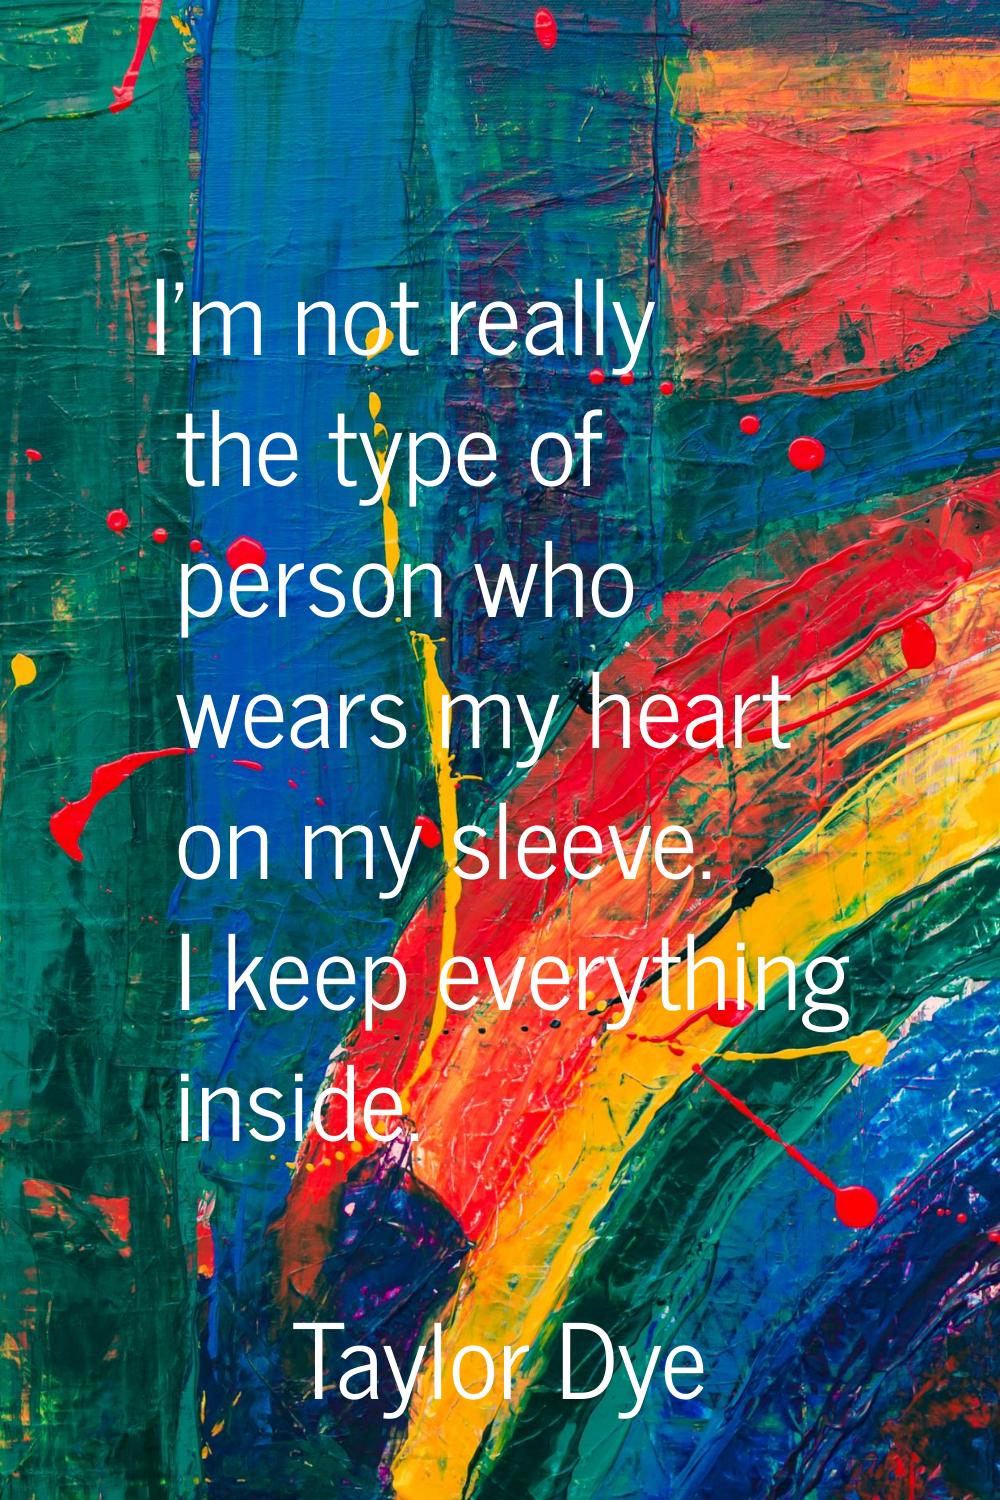 I'm not really the type of person who wears my heart on my sleeve. I keep everything inside.